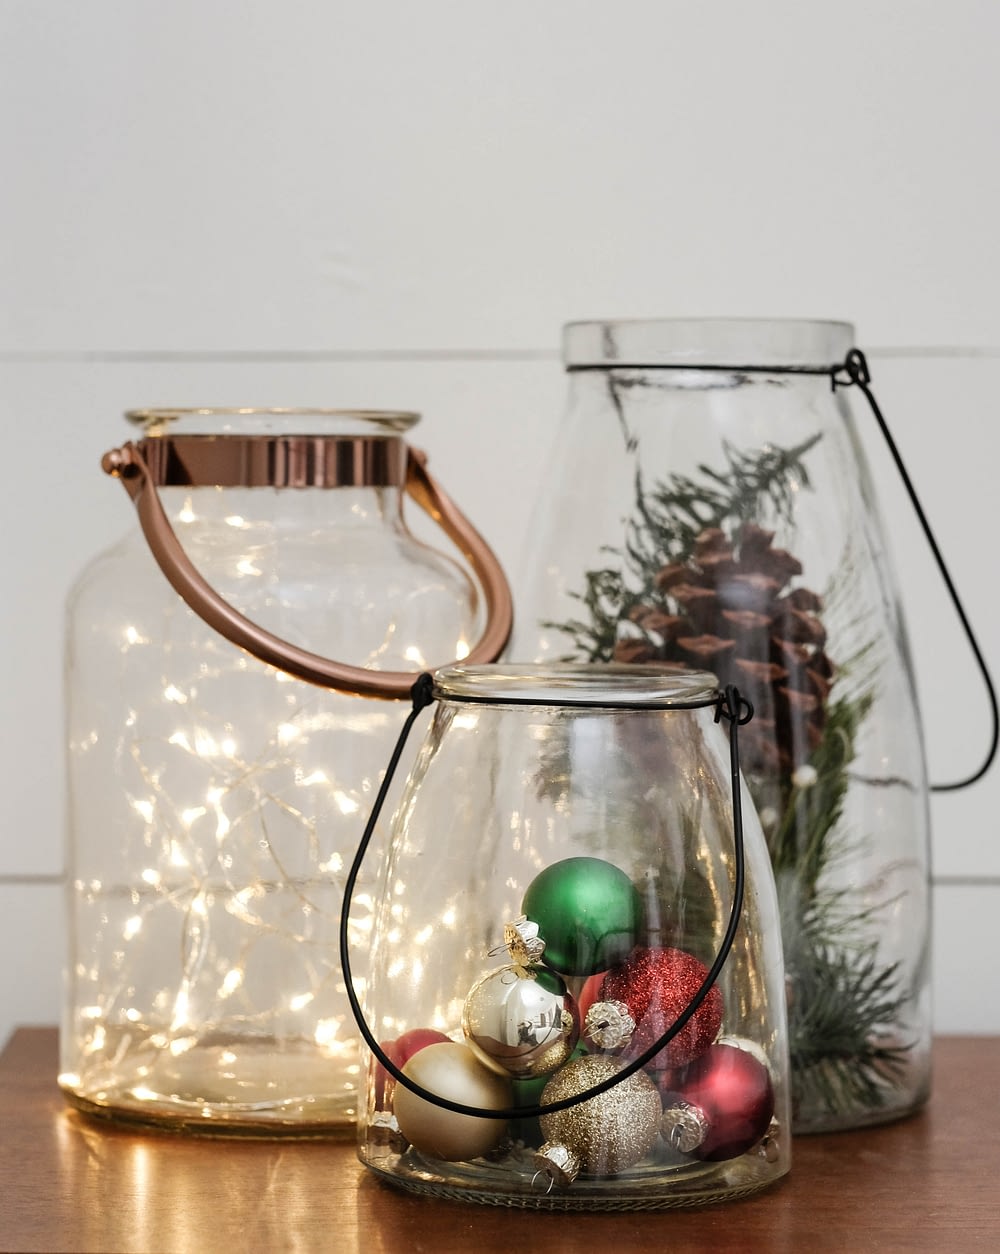 Christmas decor using 3 glass lanterns filled with twinkle lights, Christmas ornaments and pinecones